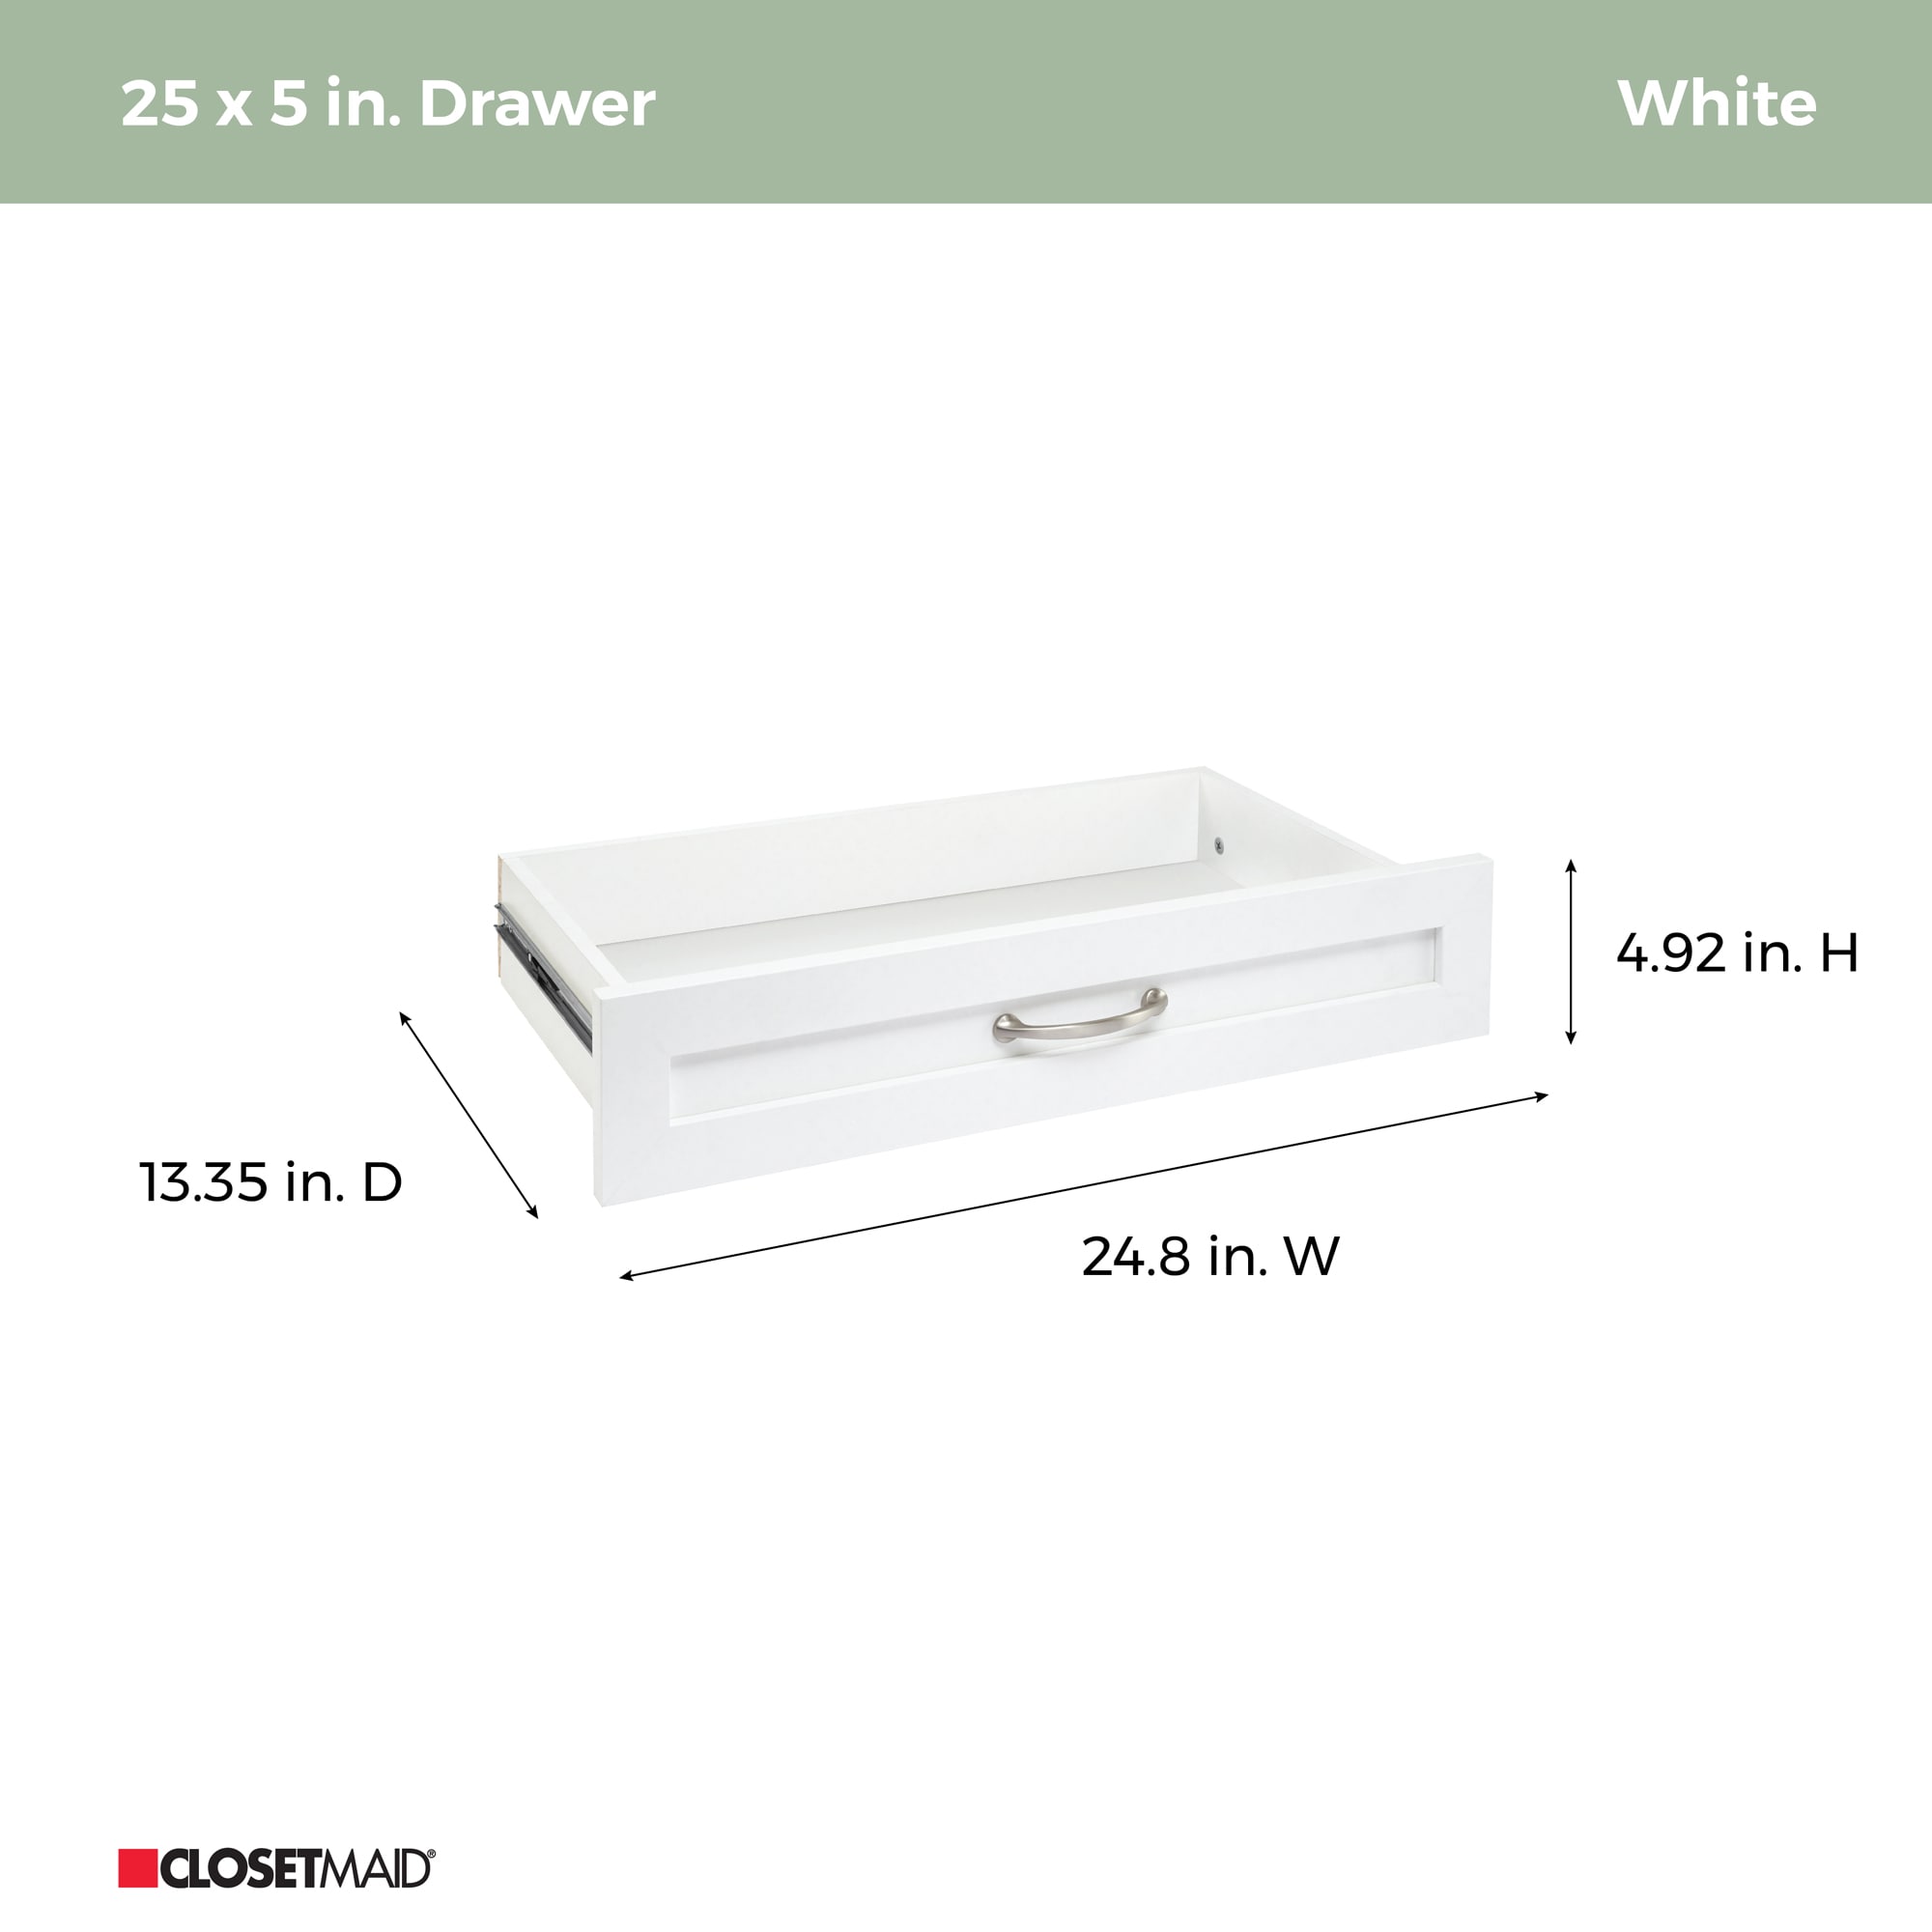 ClosetMaid BrightWood 25-in x 5-in x 13-in White Drawer Unit in the ...